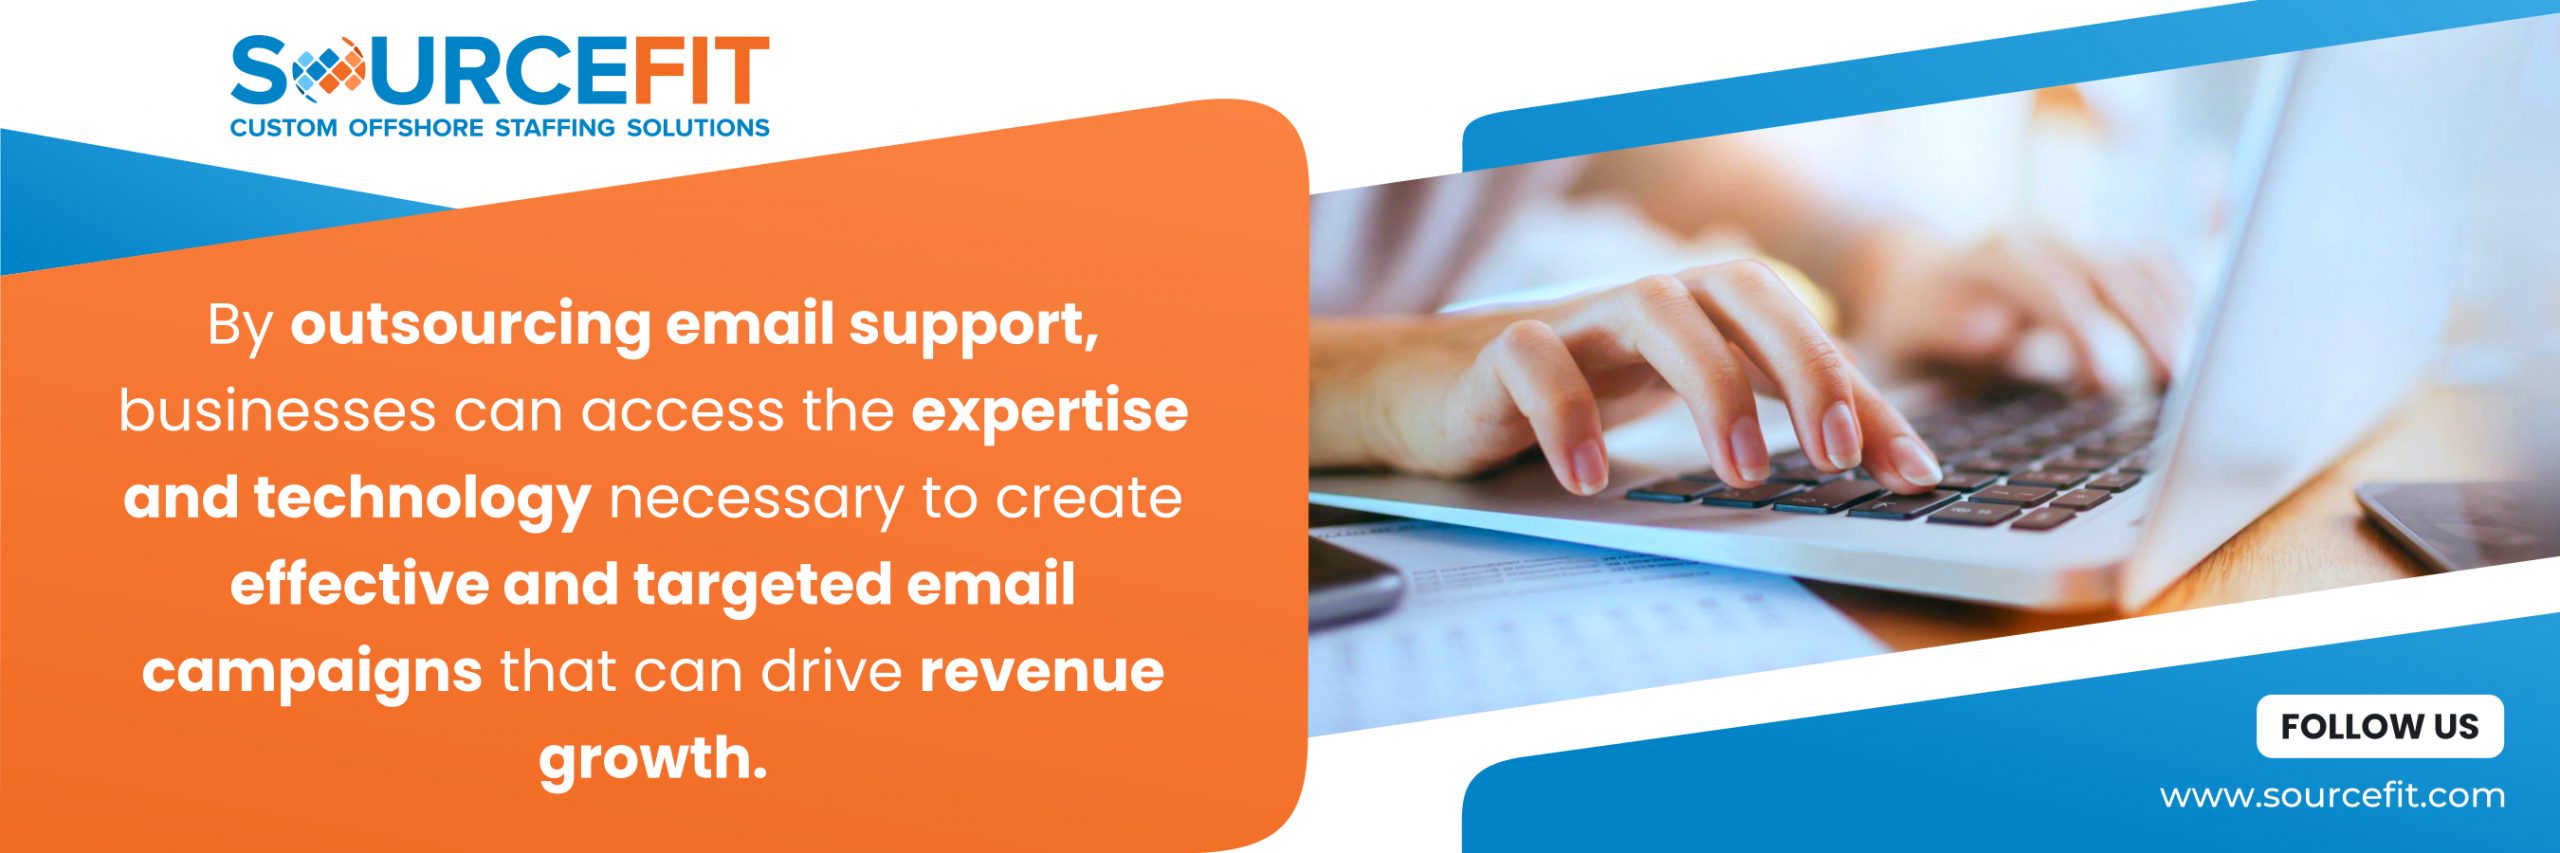 Email Support Outsourcing